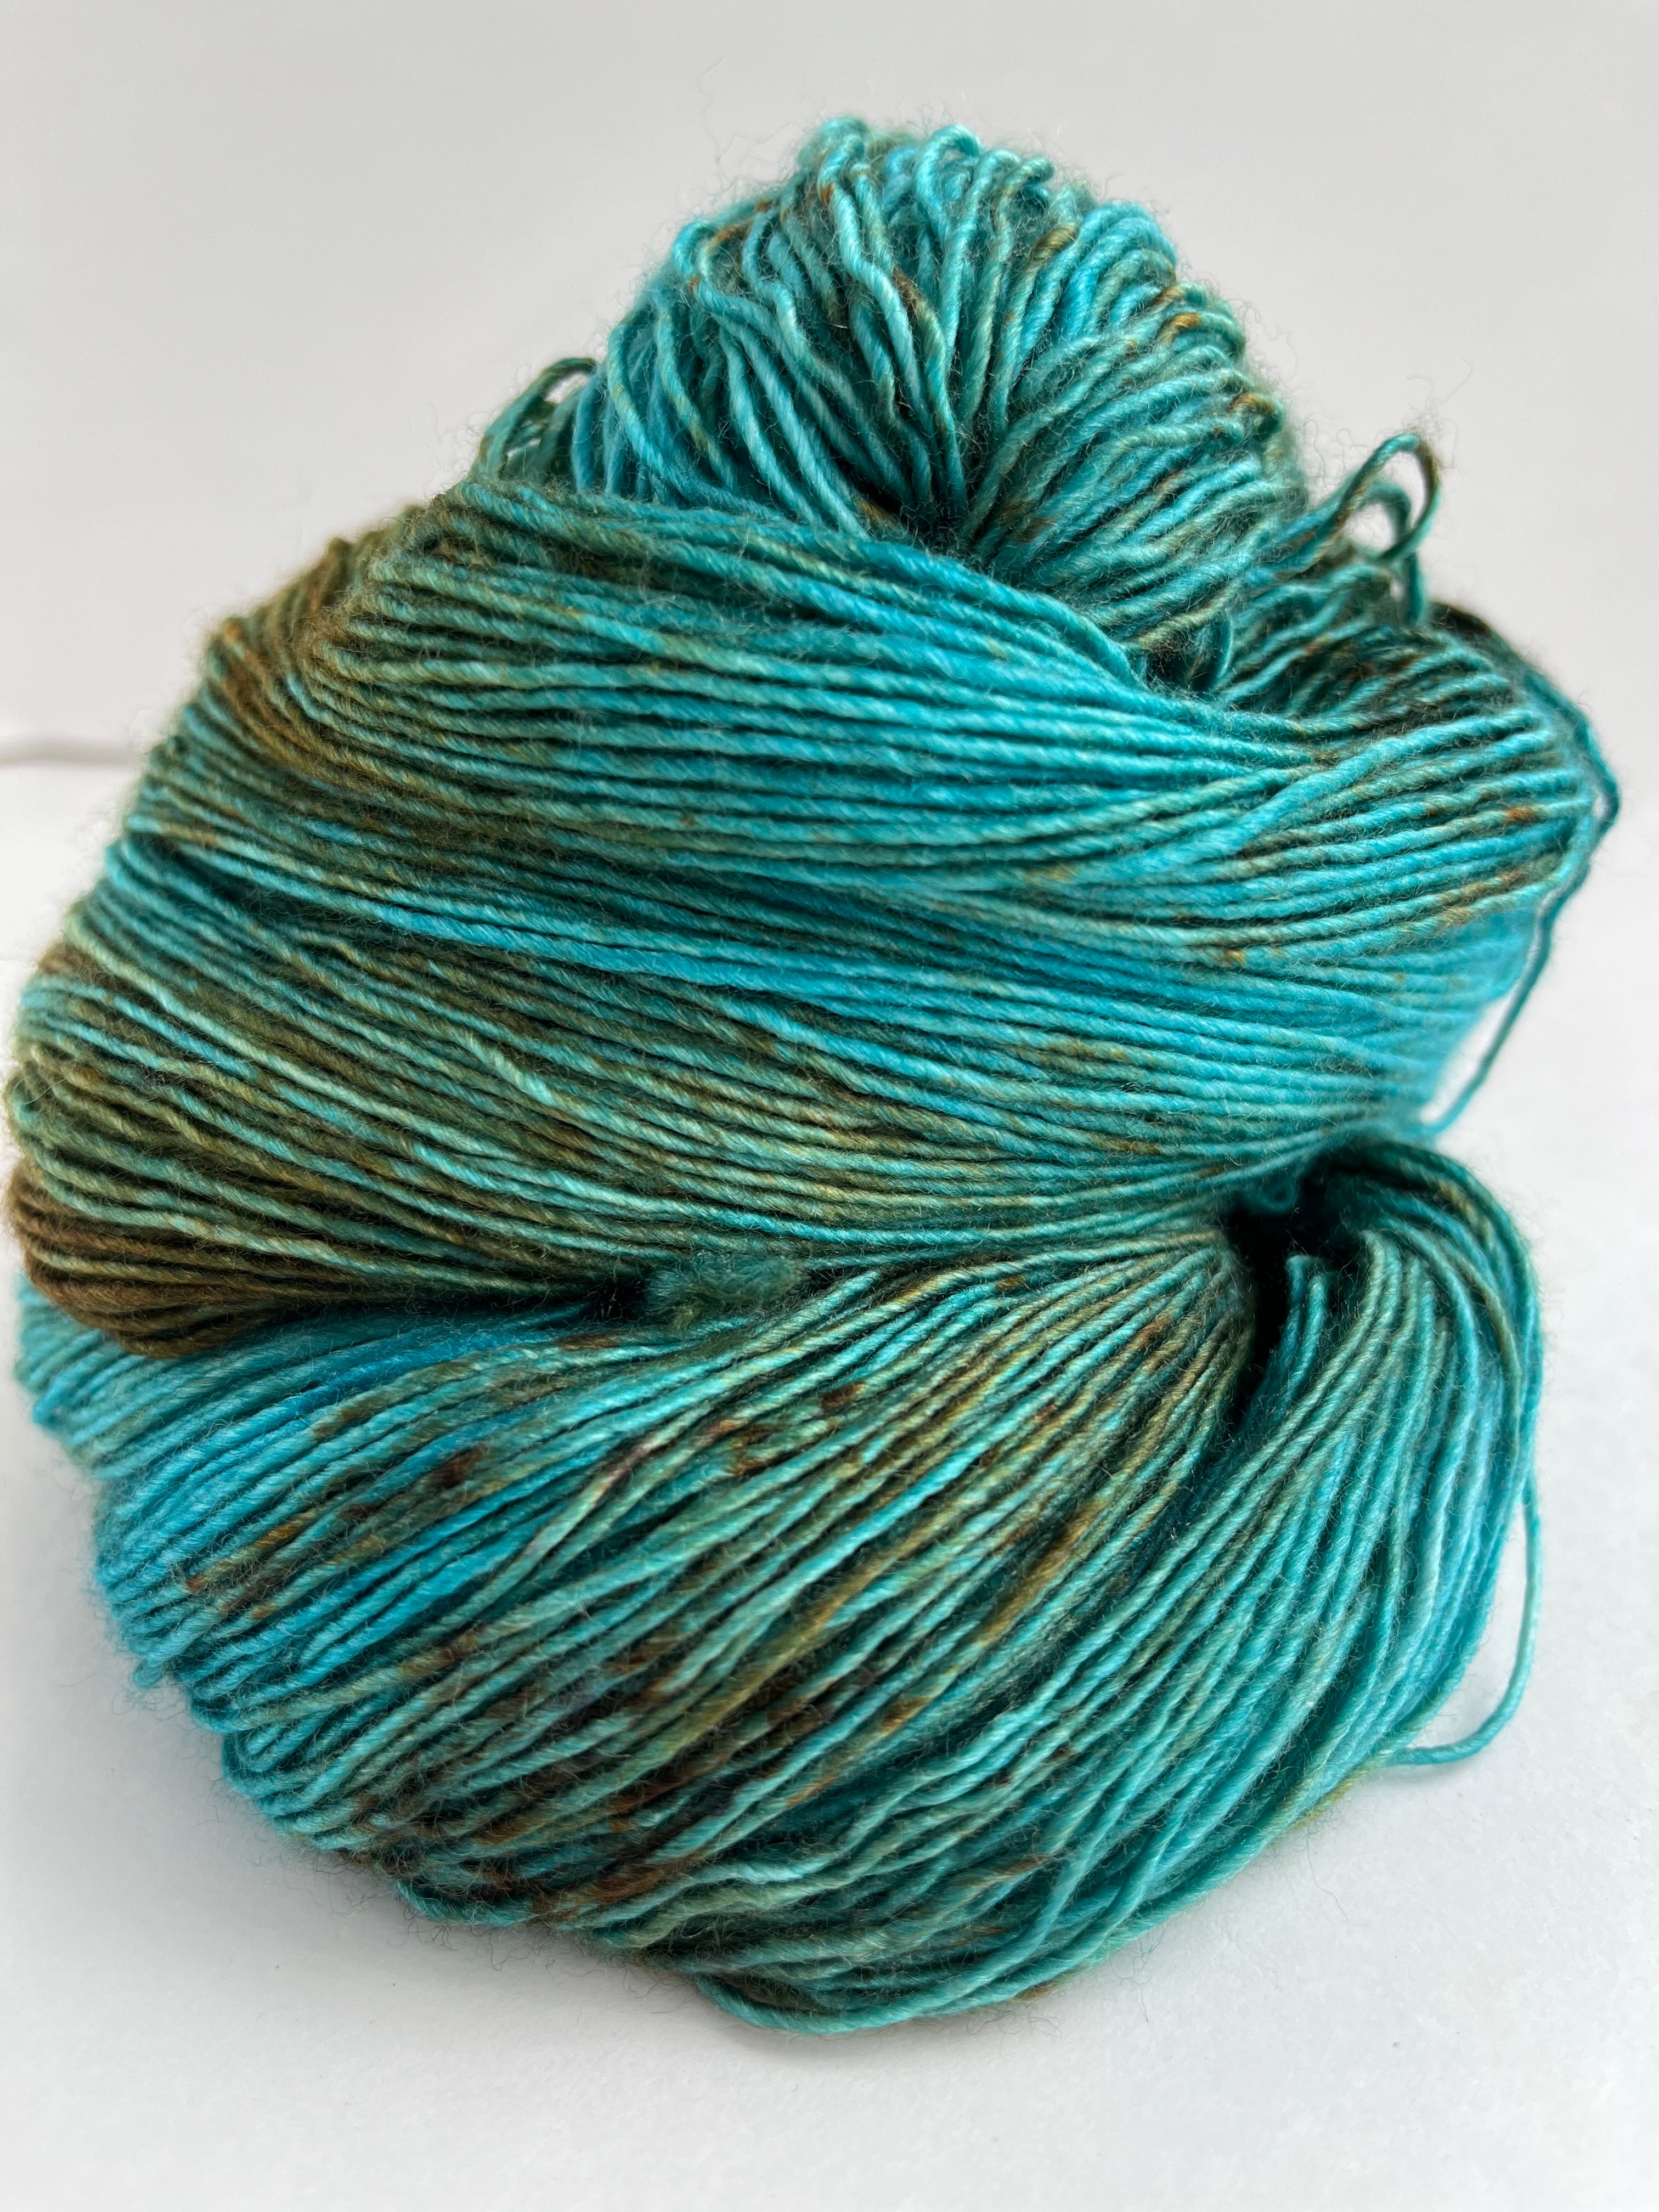 Sunni's Favorite - River Silk from Tributary Yarns